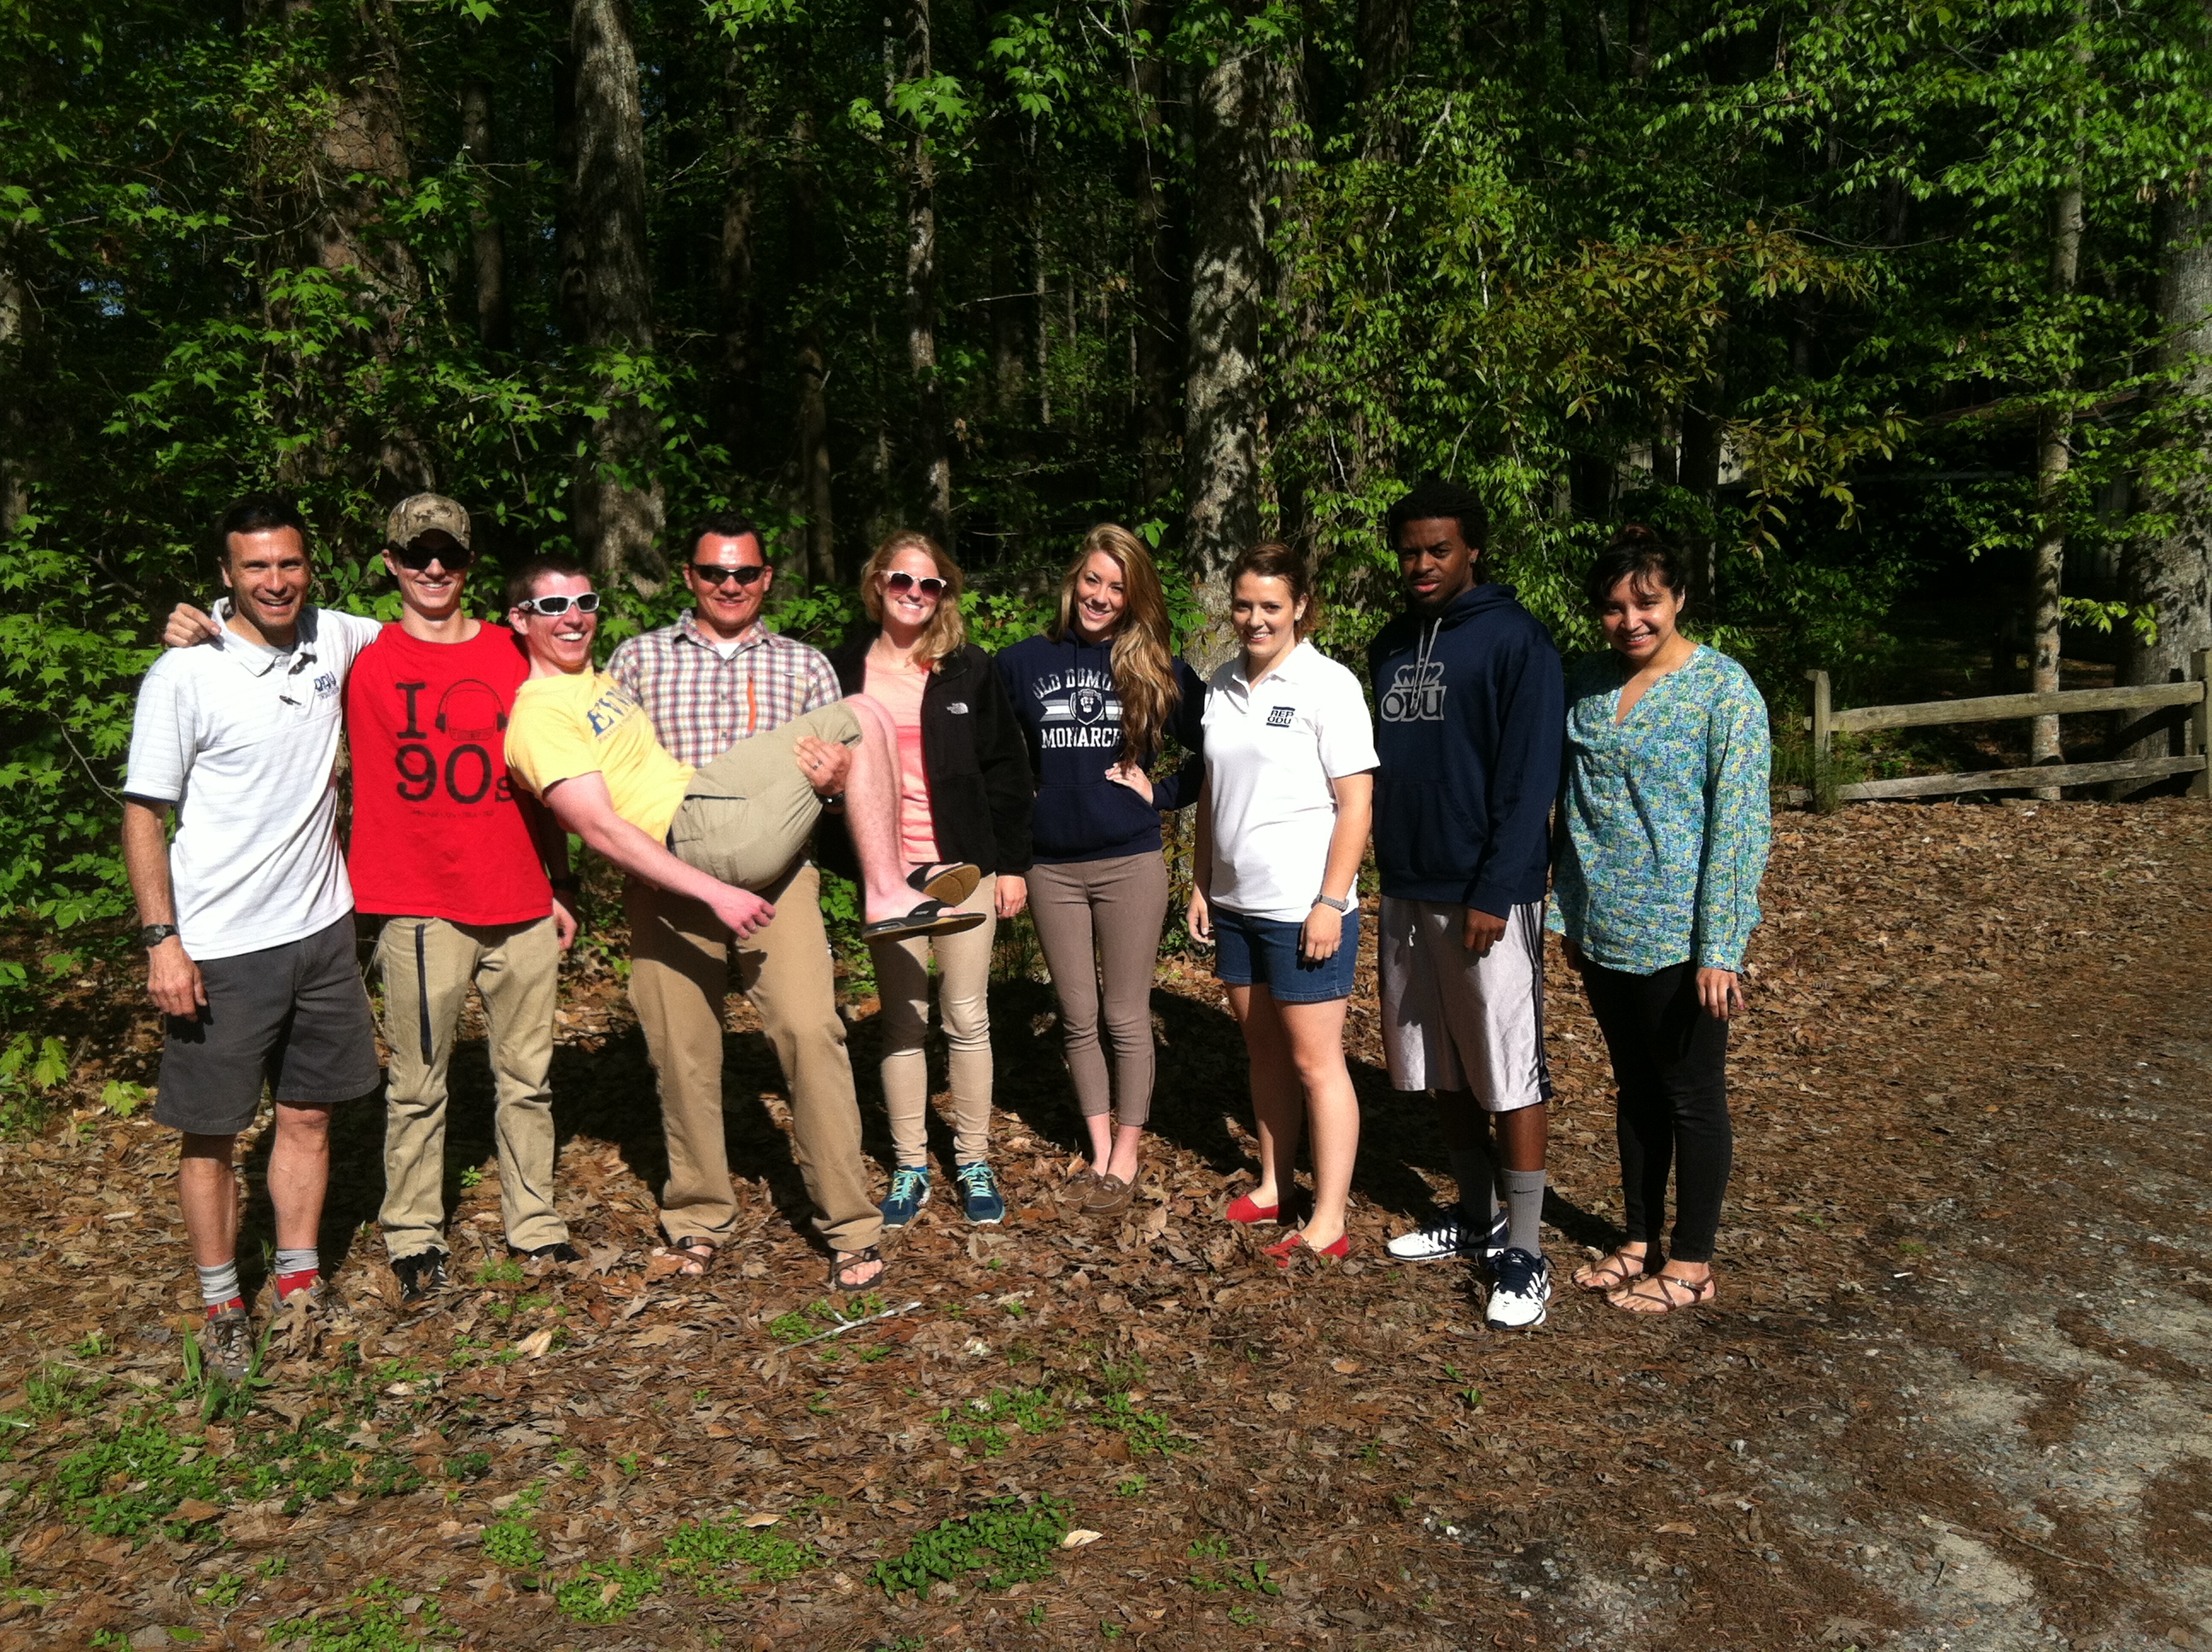 Students from Park, Recreation and Tourism studies who volunteered to work a weekend with children with Diabetes.